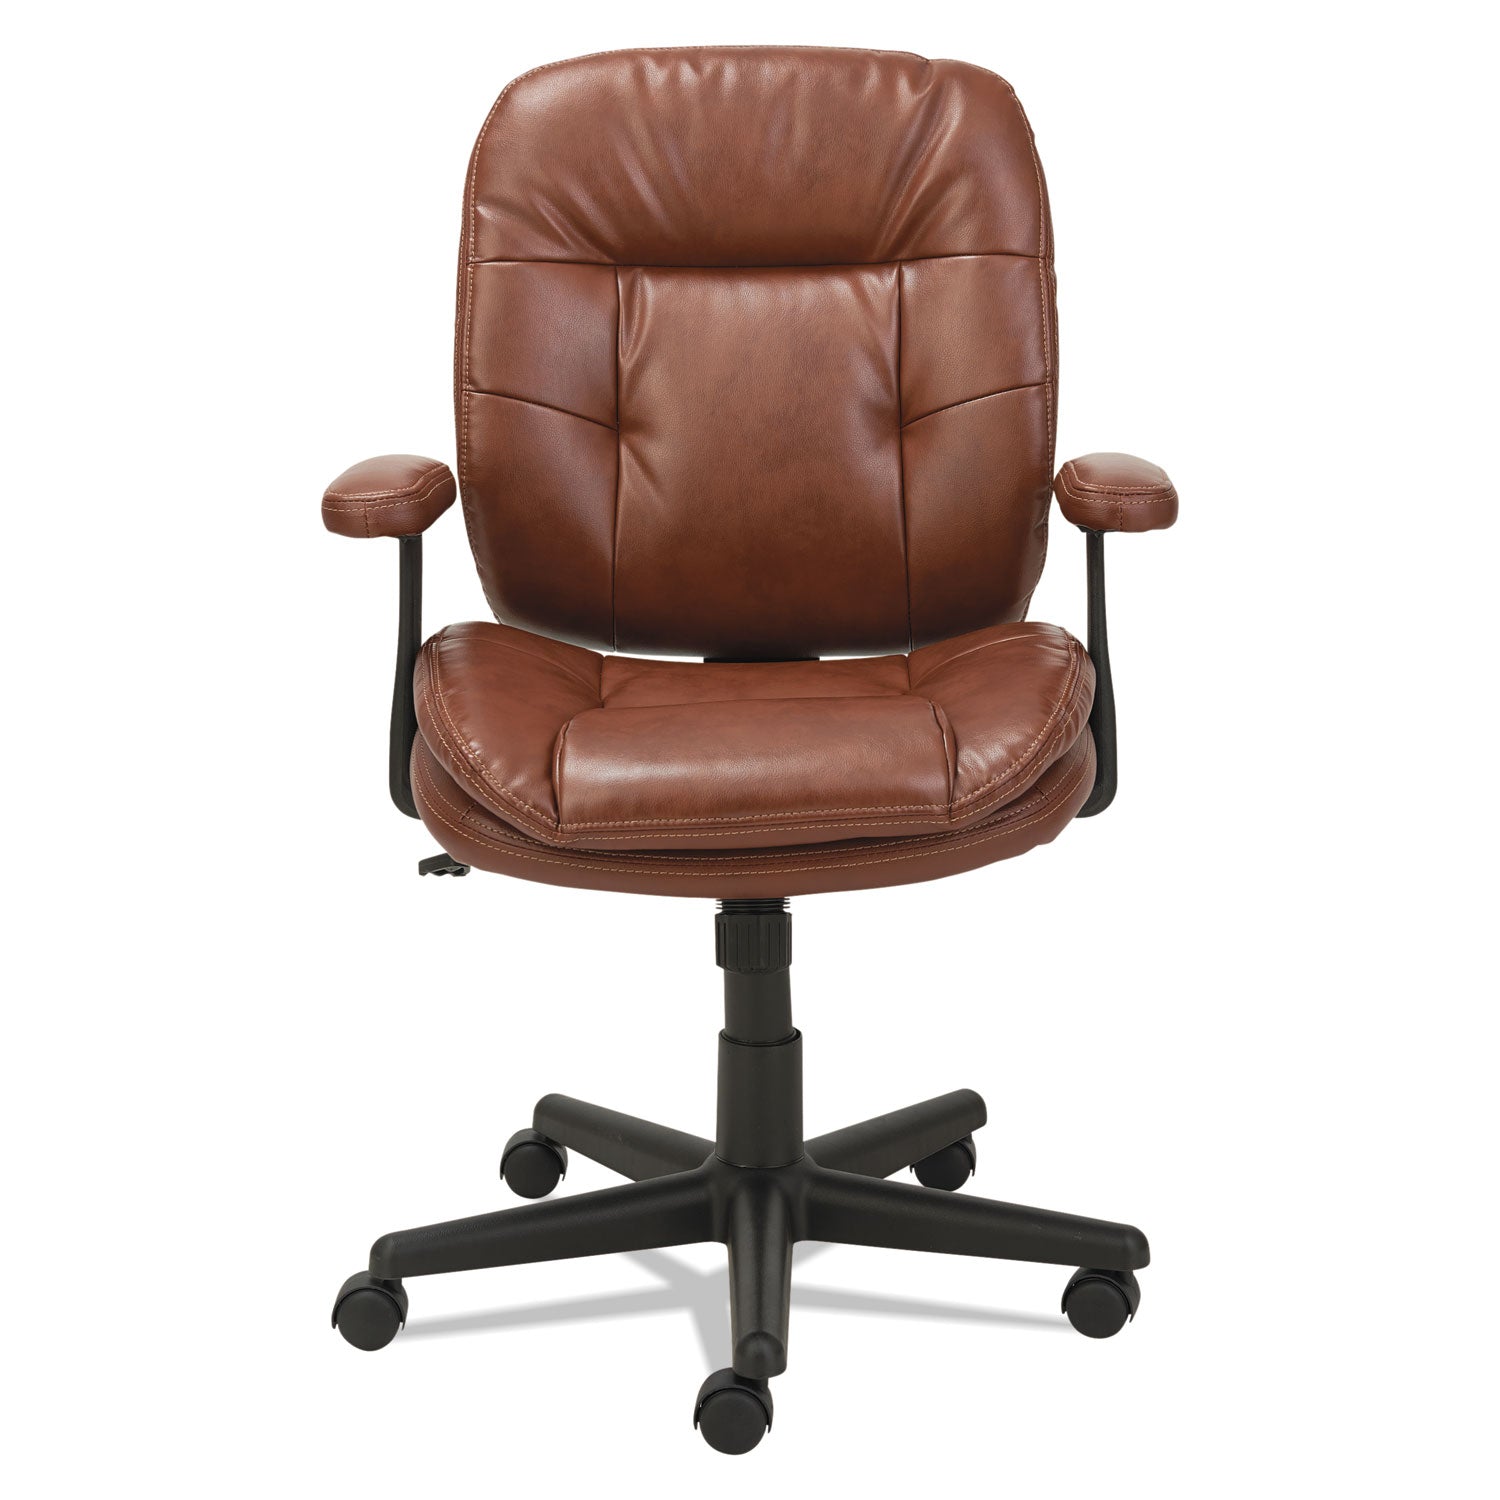 swivel-tilt-bonded-leather-task-chair-supports-250-lb-1693-to-2067-seat-height-chestnut-brown-seat-back-black-base_oifst4859 - 1